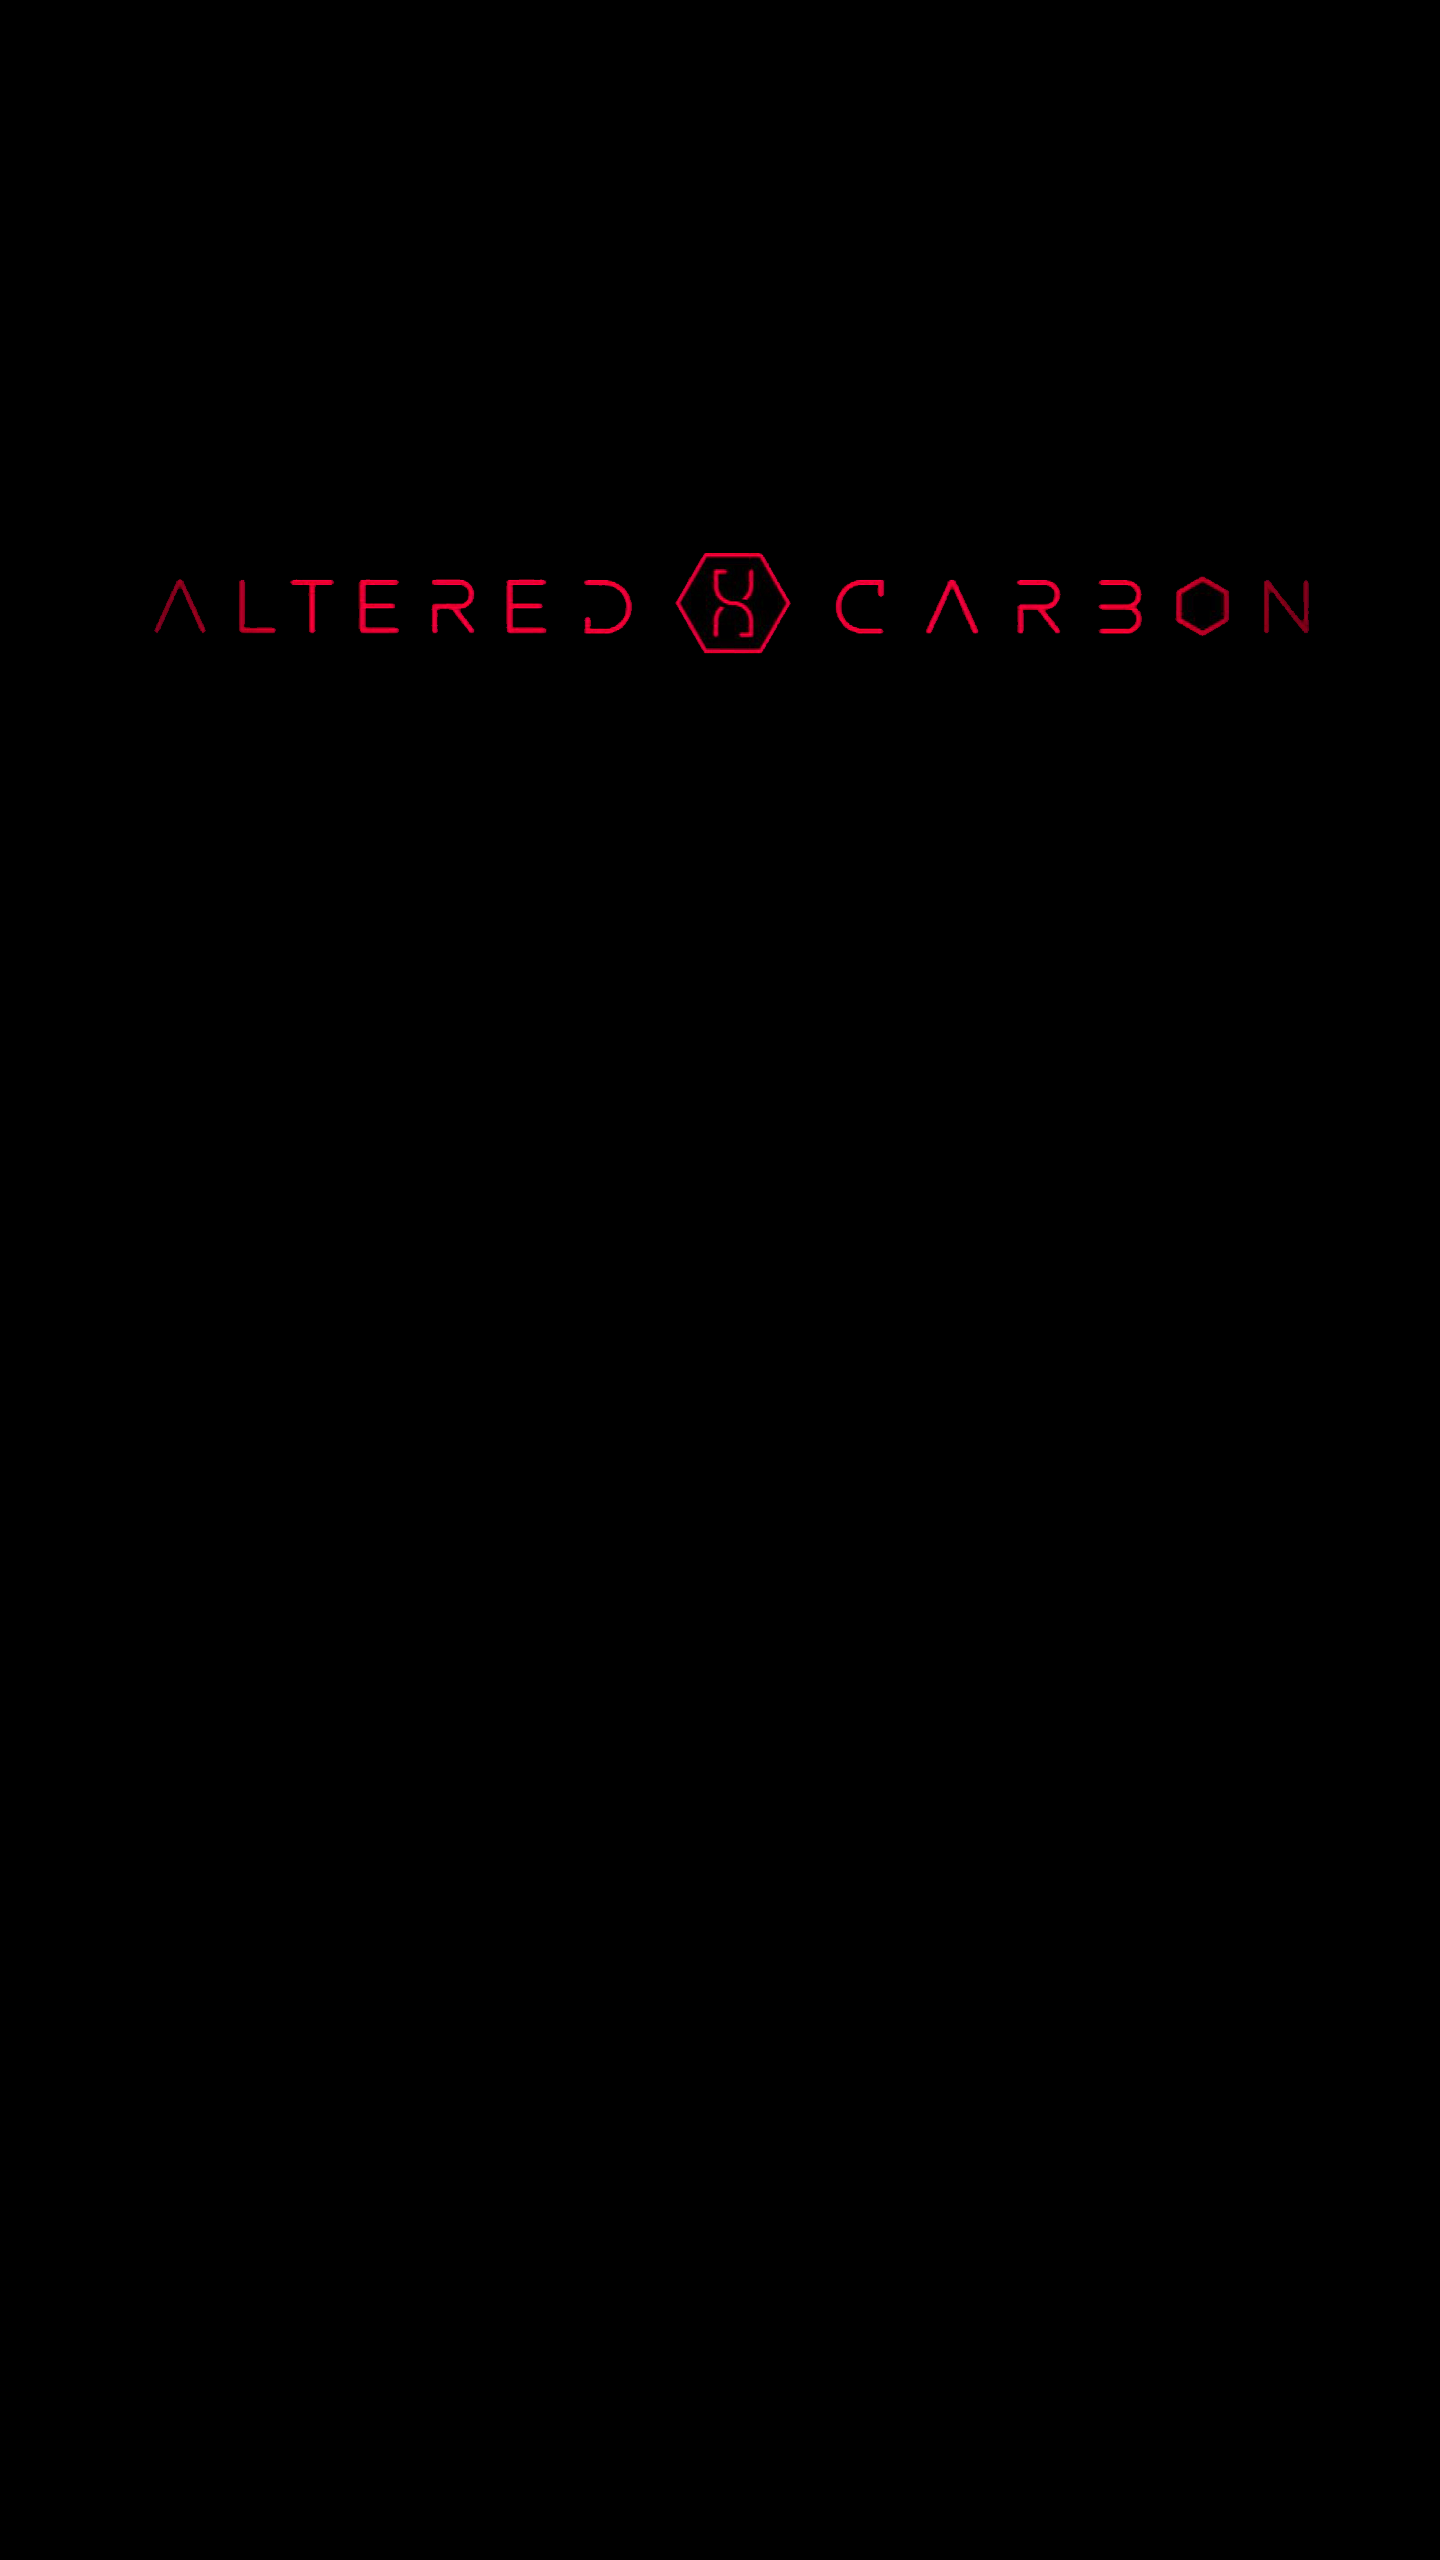 Altered Carbon [1440x2560]